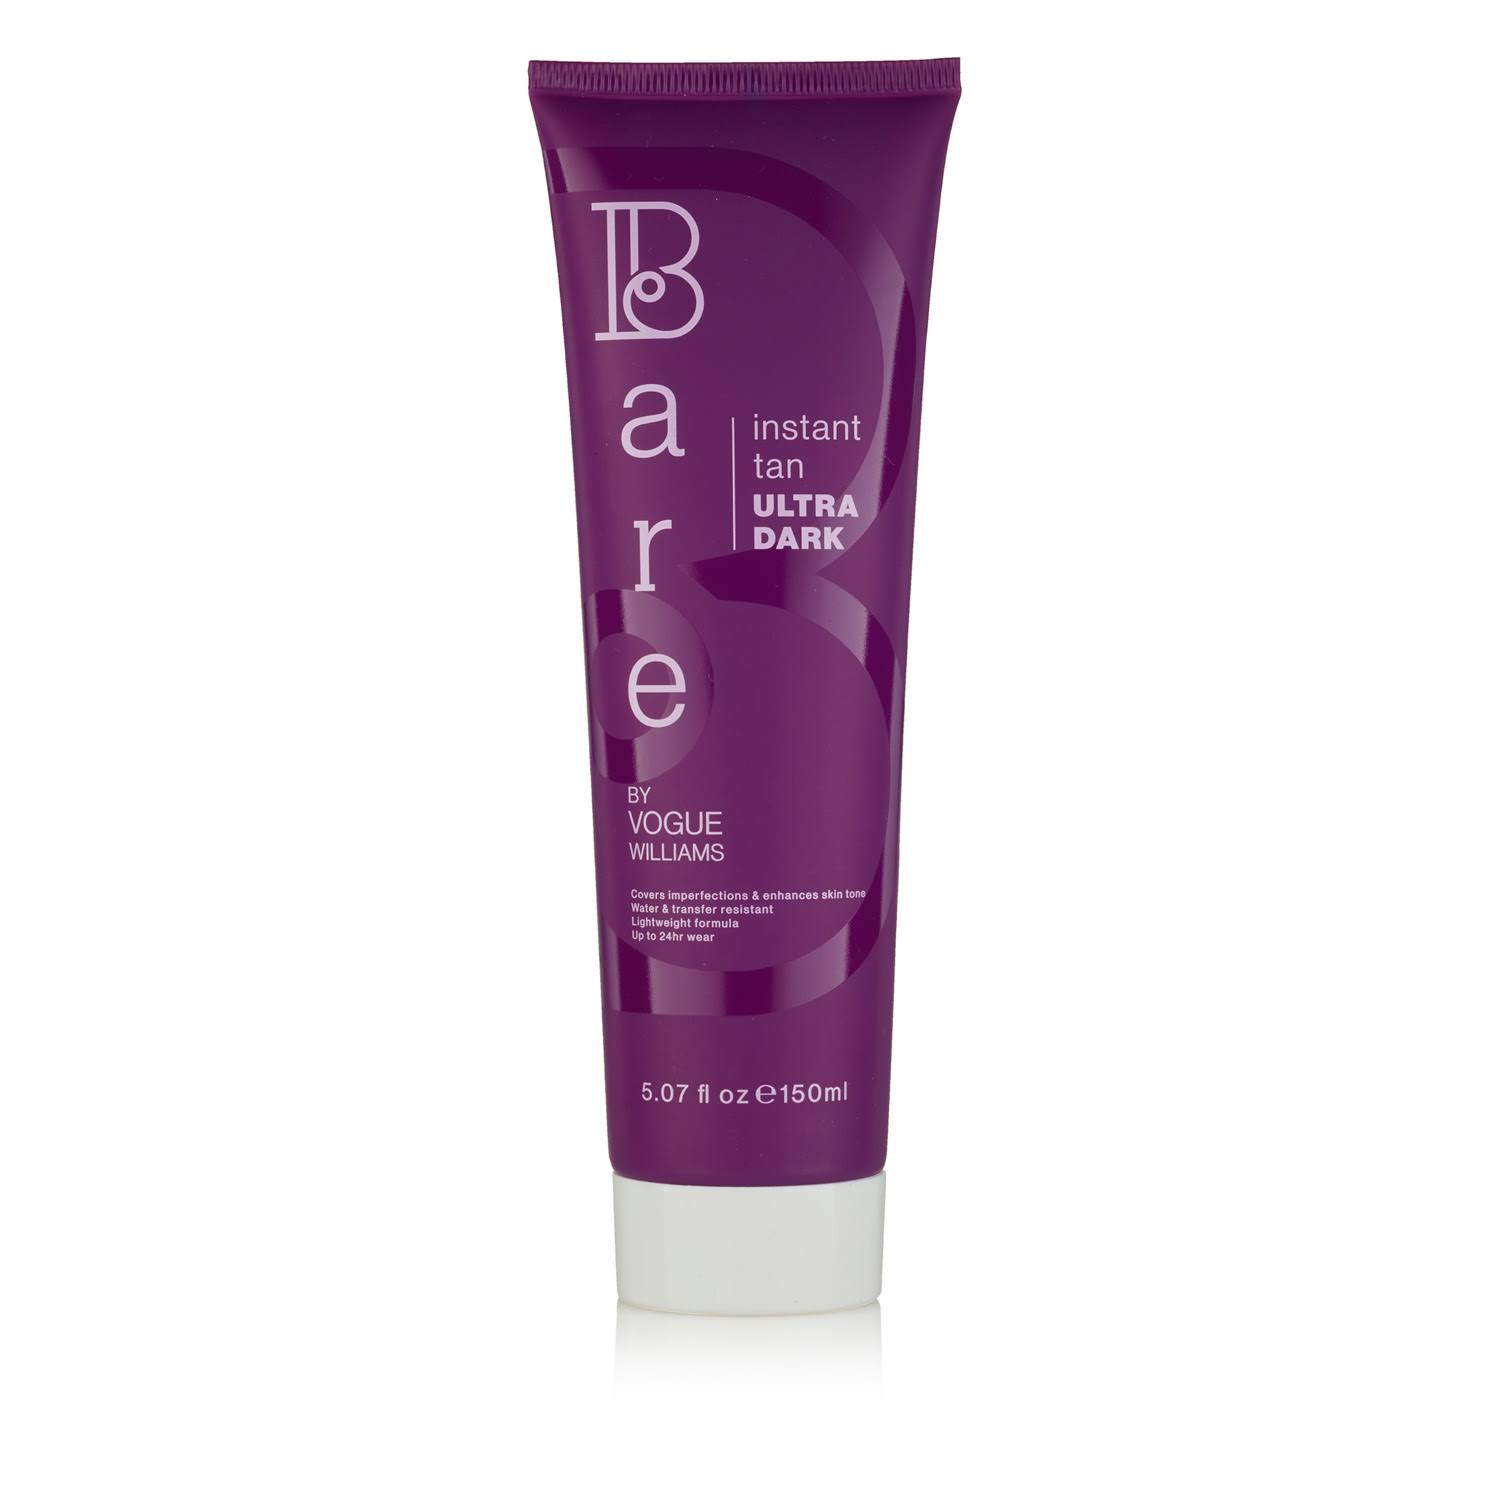 Bare by Vogue Williams Instant Tan